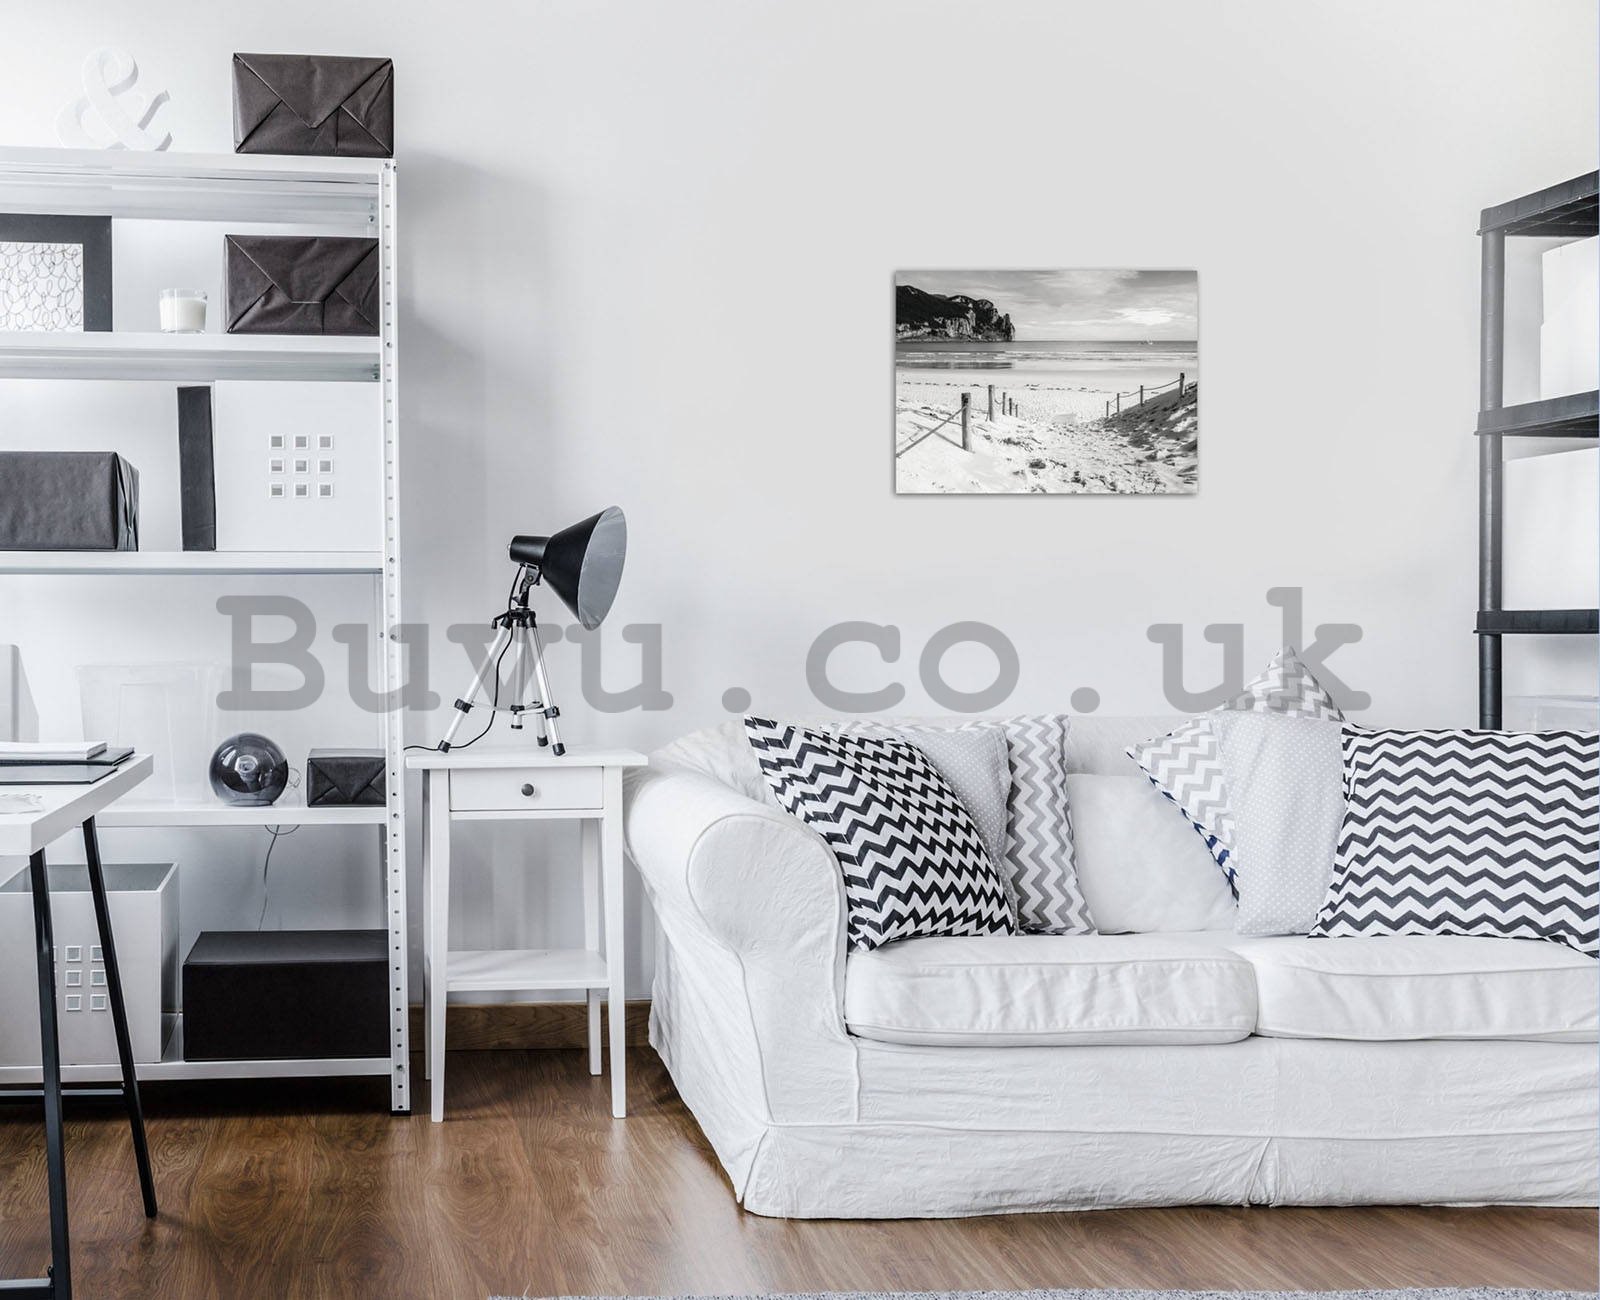 Painting on canvas: Sandy beach (black and white) - 80x60 cm